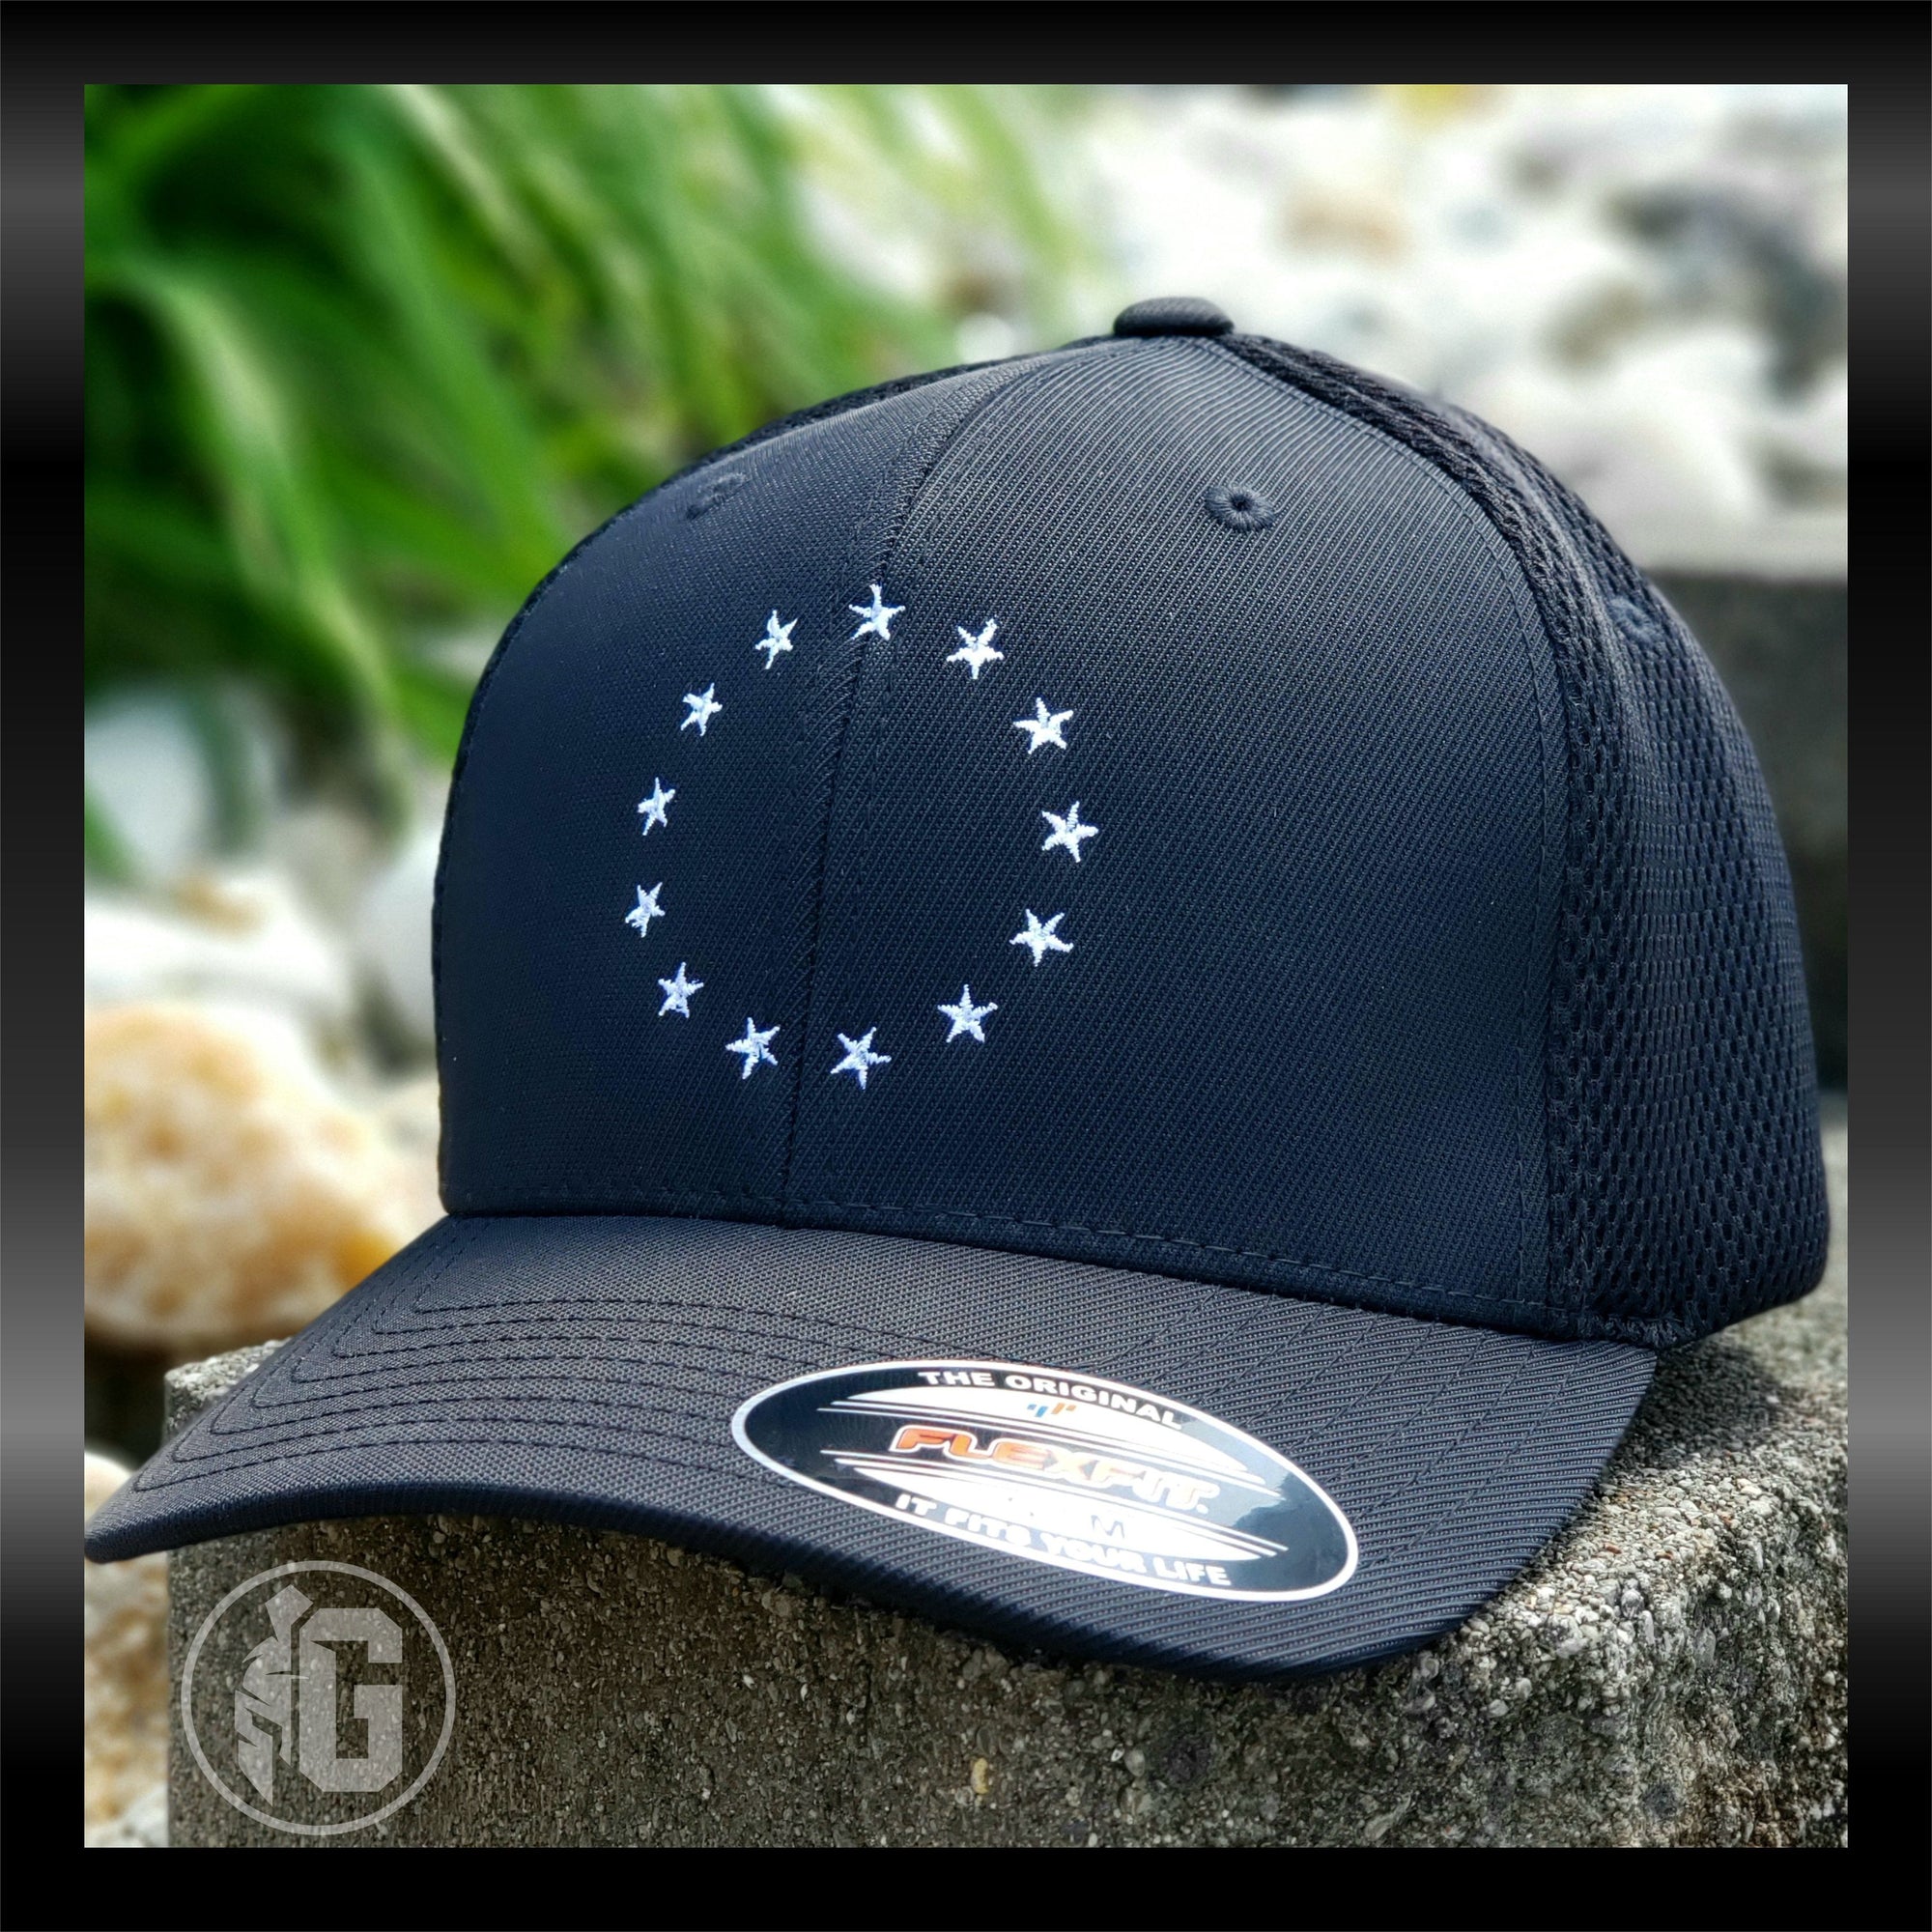 Betsy Ross 13 Star Embroidered Hat | Grit Gear Apparel®